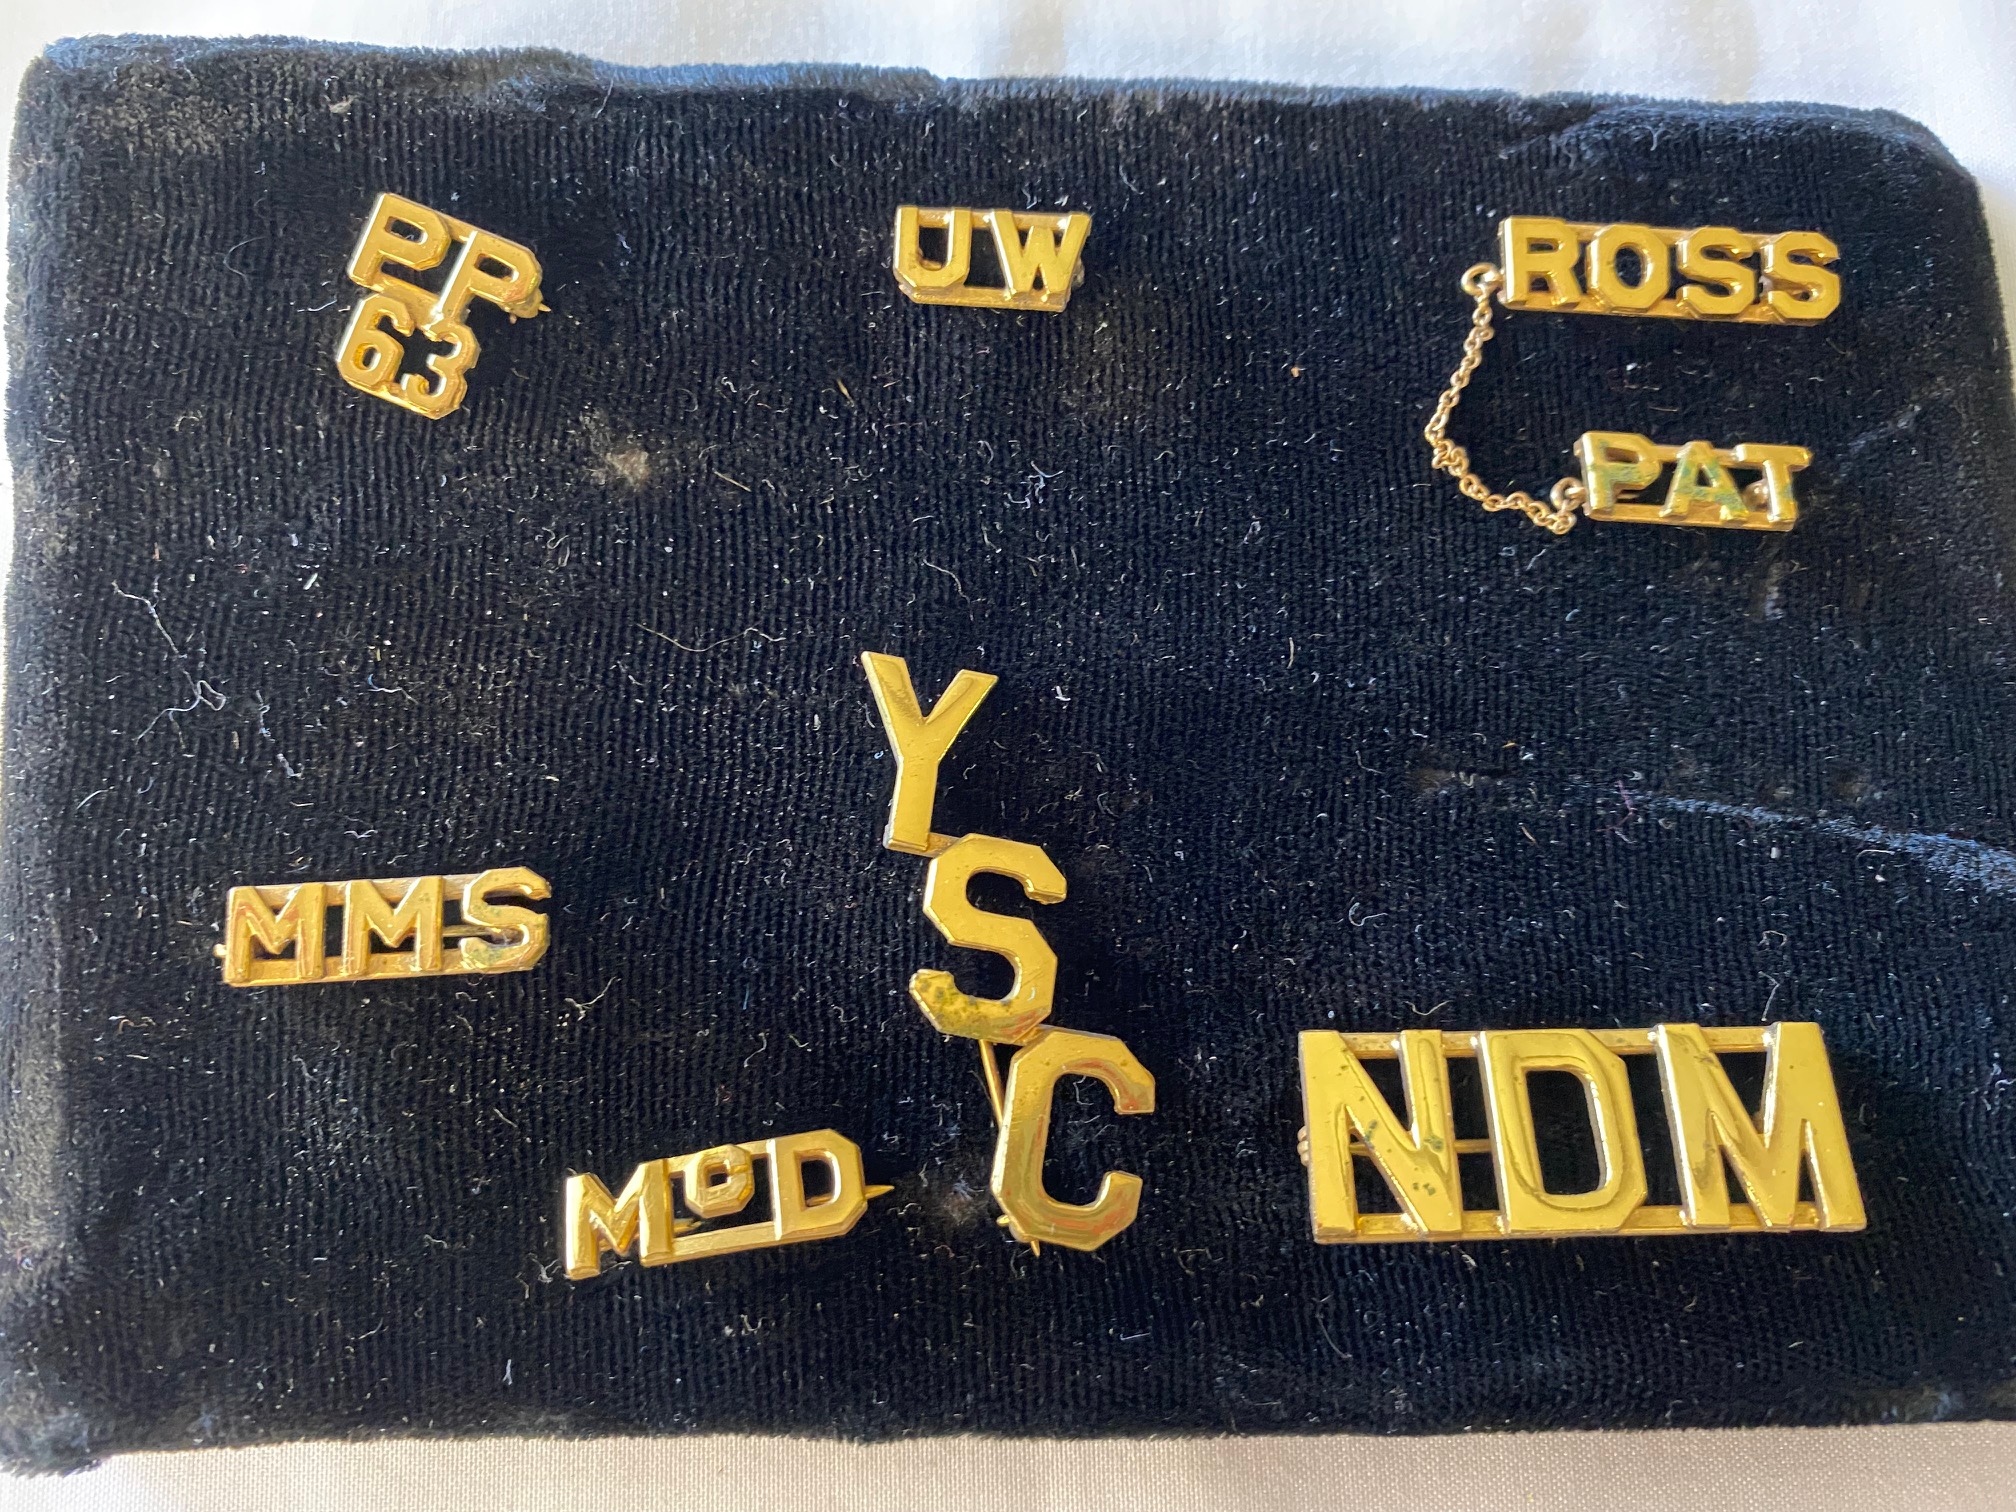 Vintage Salesman Sample Pin Letters For Schools, Businesses or Organizations